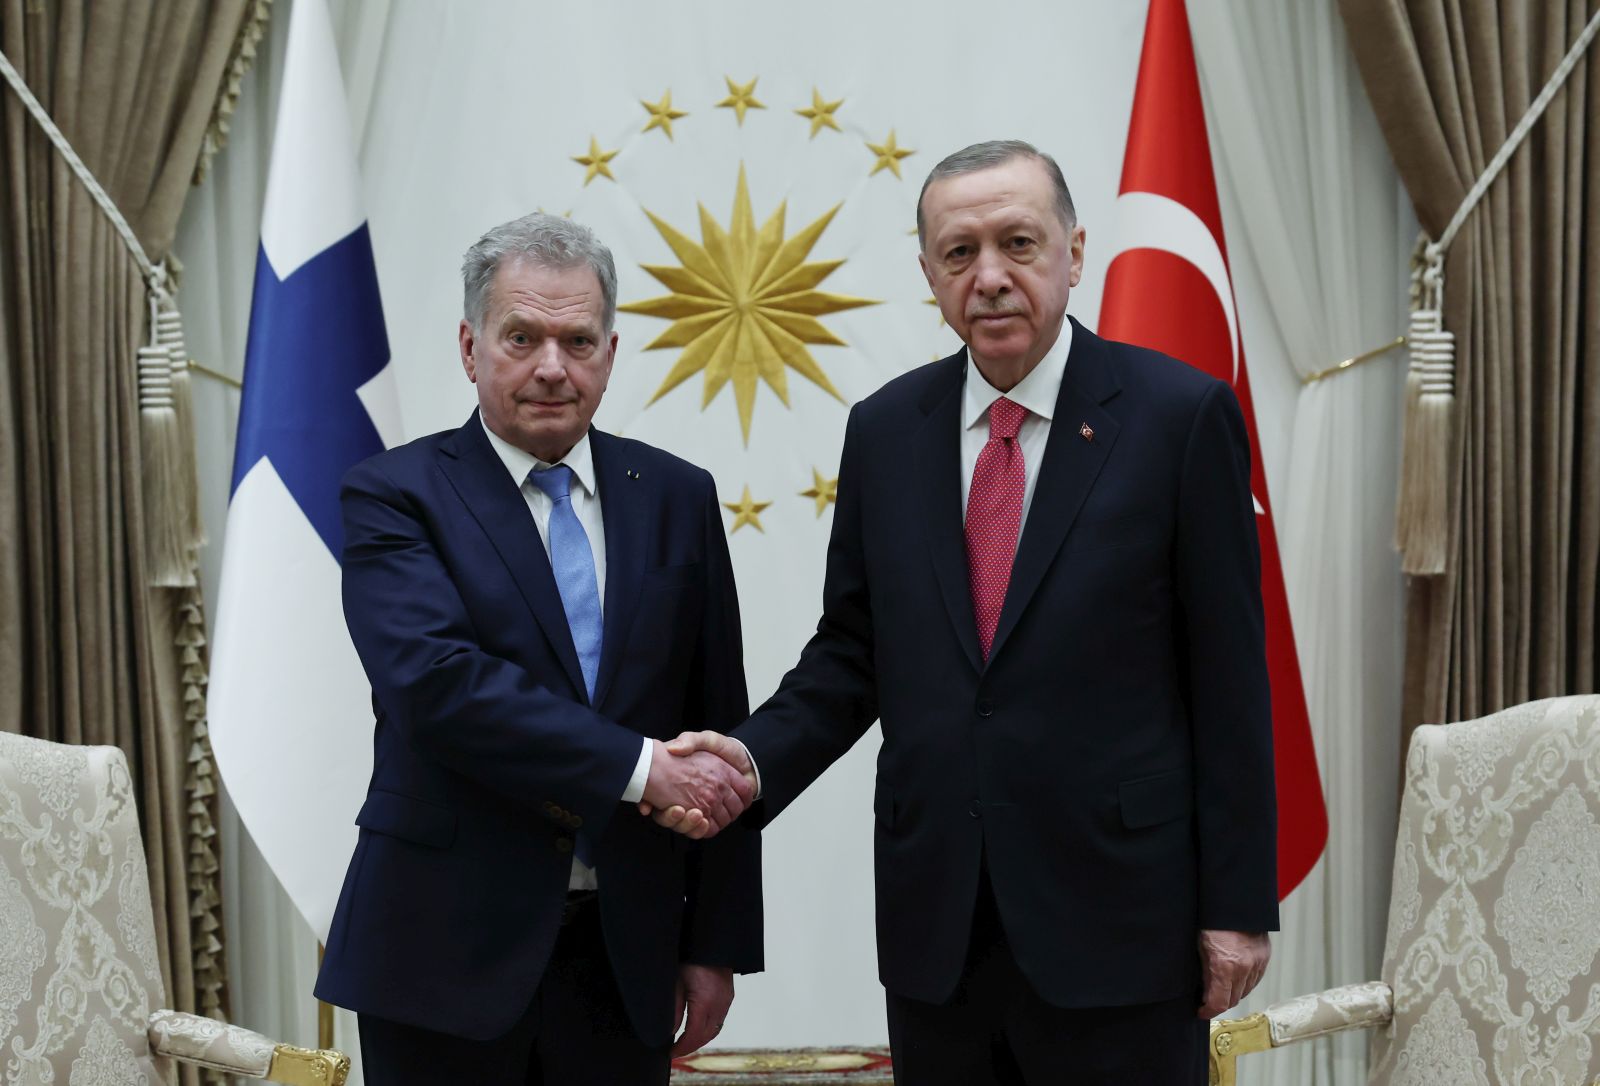 epa10528406 A handout photo made available by Turkish presidential press office shows Finland's President Sauli Niinisto (L) and Turkish President Recep Tayyip Erdogan pose before their meeting at the presidential palace in Ankara, Turkey, 17 March 2023. Niinisto is in Turkey for the talks on Turkey's approval of Finland’s NATO membership bid. Following Russia's invasion of Ukraine in May 2022, Finland and Sweden submitted applications to join NATO.  EPA/MURAT CETIN MUHURDAR HANDOUT  HANDOUT EDITORIAL USE ONLY/NO SALES